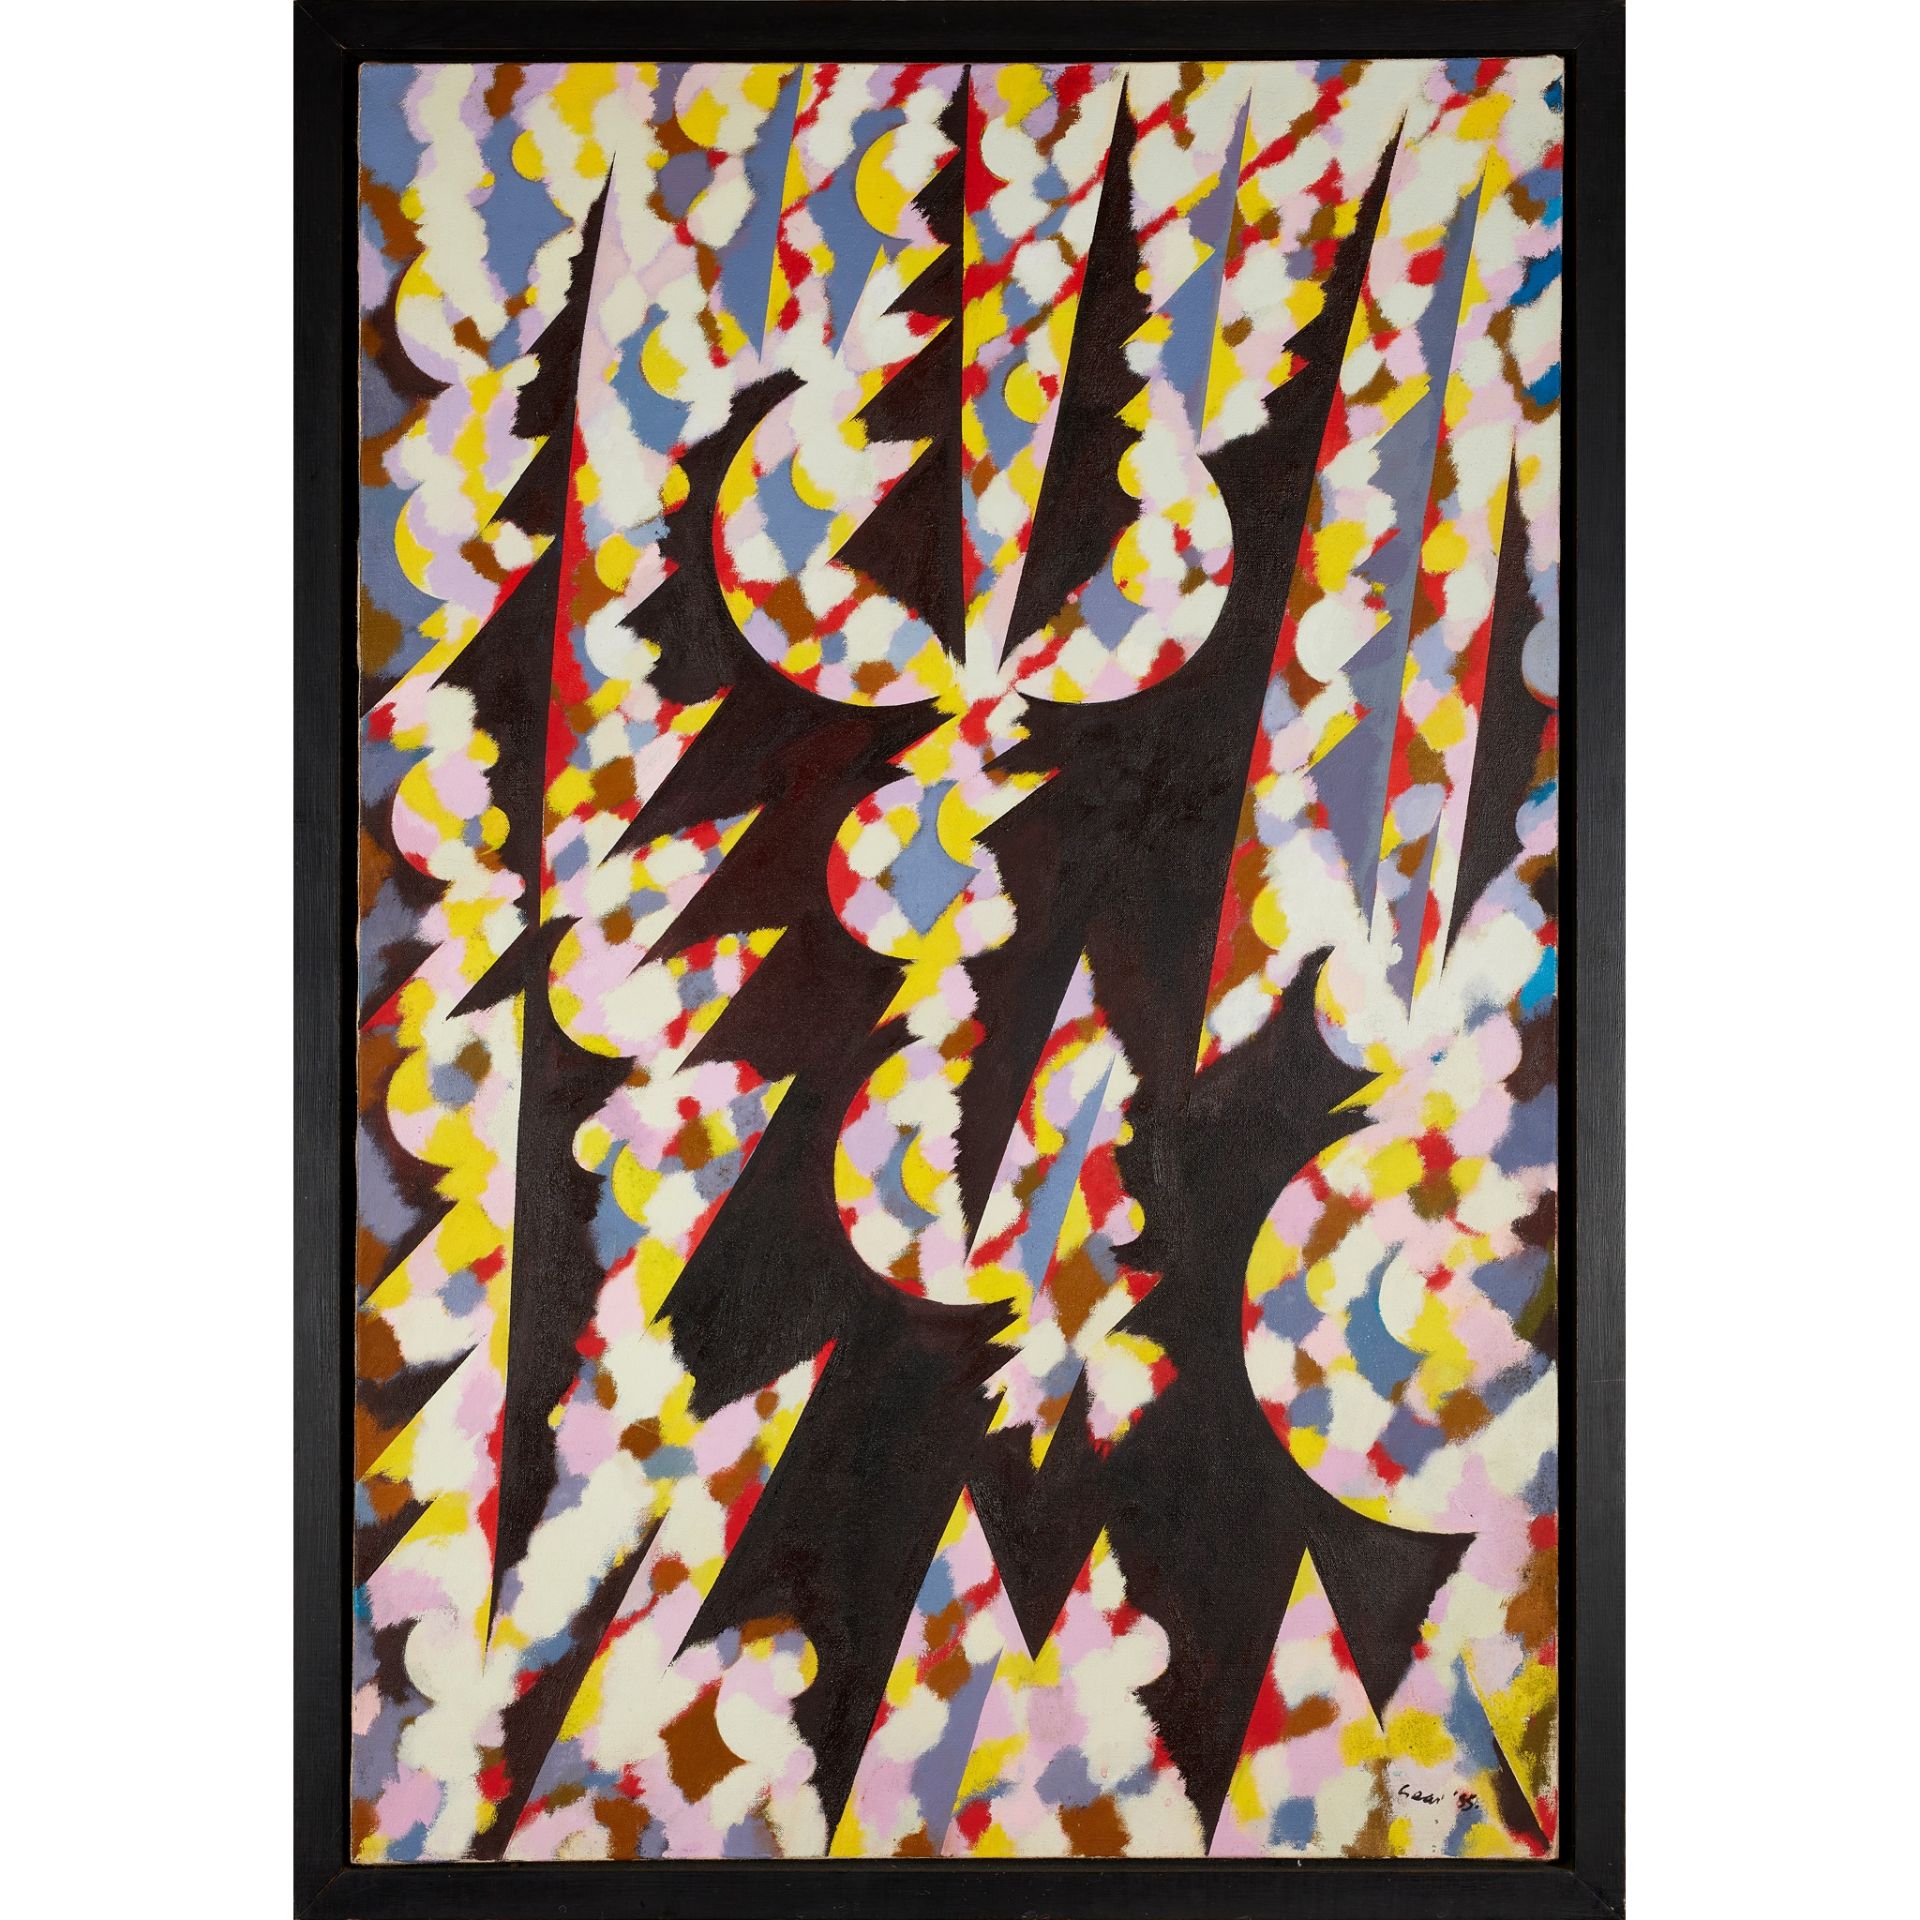 § WILLIAM GEAR R.A., F.R.S.A., R.B.S.A. (SCOTTISH 1915-1997) ABSTRACT COMPOSITION - Image 2 of 3